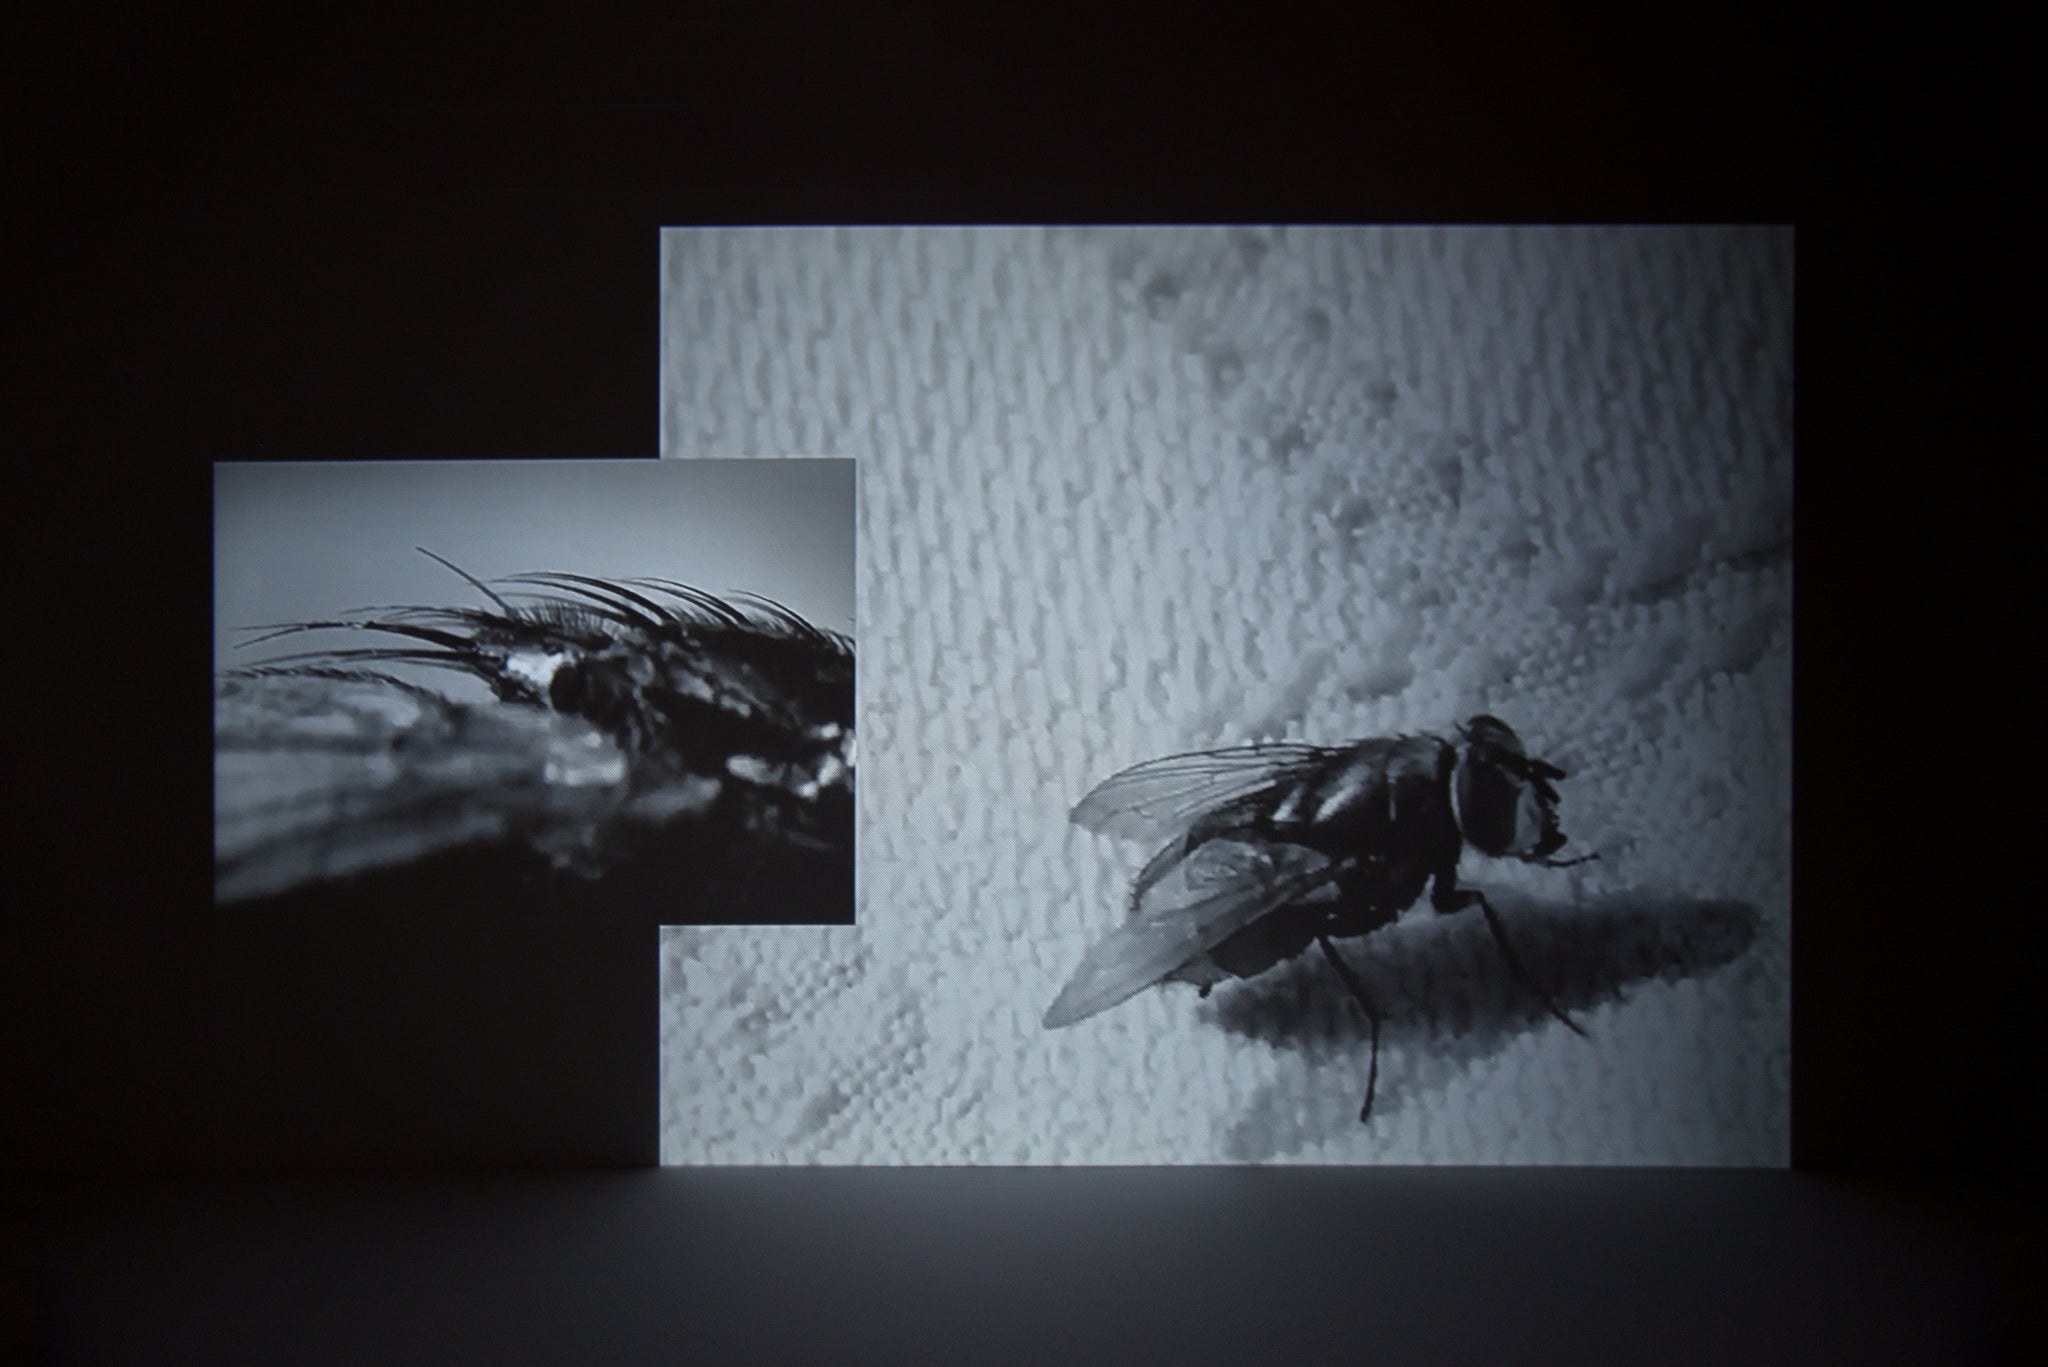 Little wing, 2022, soundscape, 05:55 / Fruit fly and it’s life-cycle under the microscope, 2022, edited found video with original soundscape, 02:03